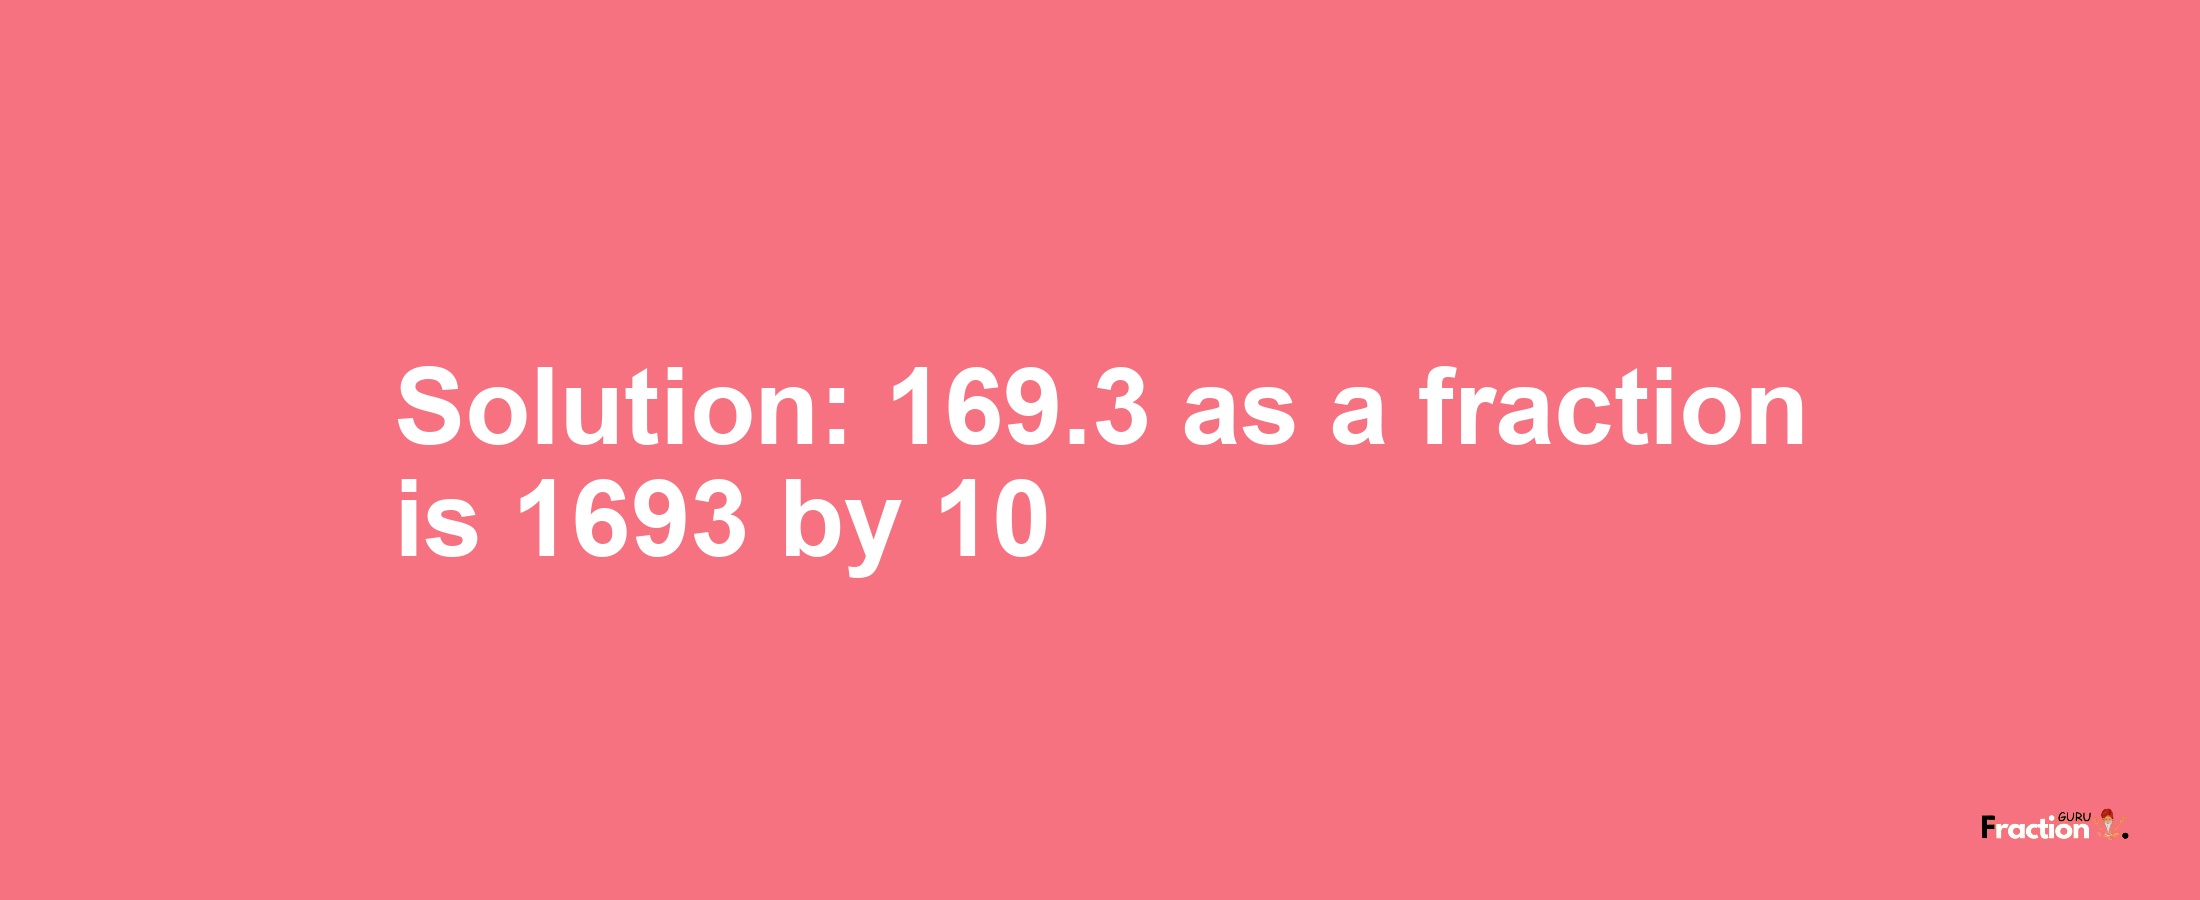 Solution:169.3 as a fraction is 1693/10